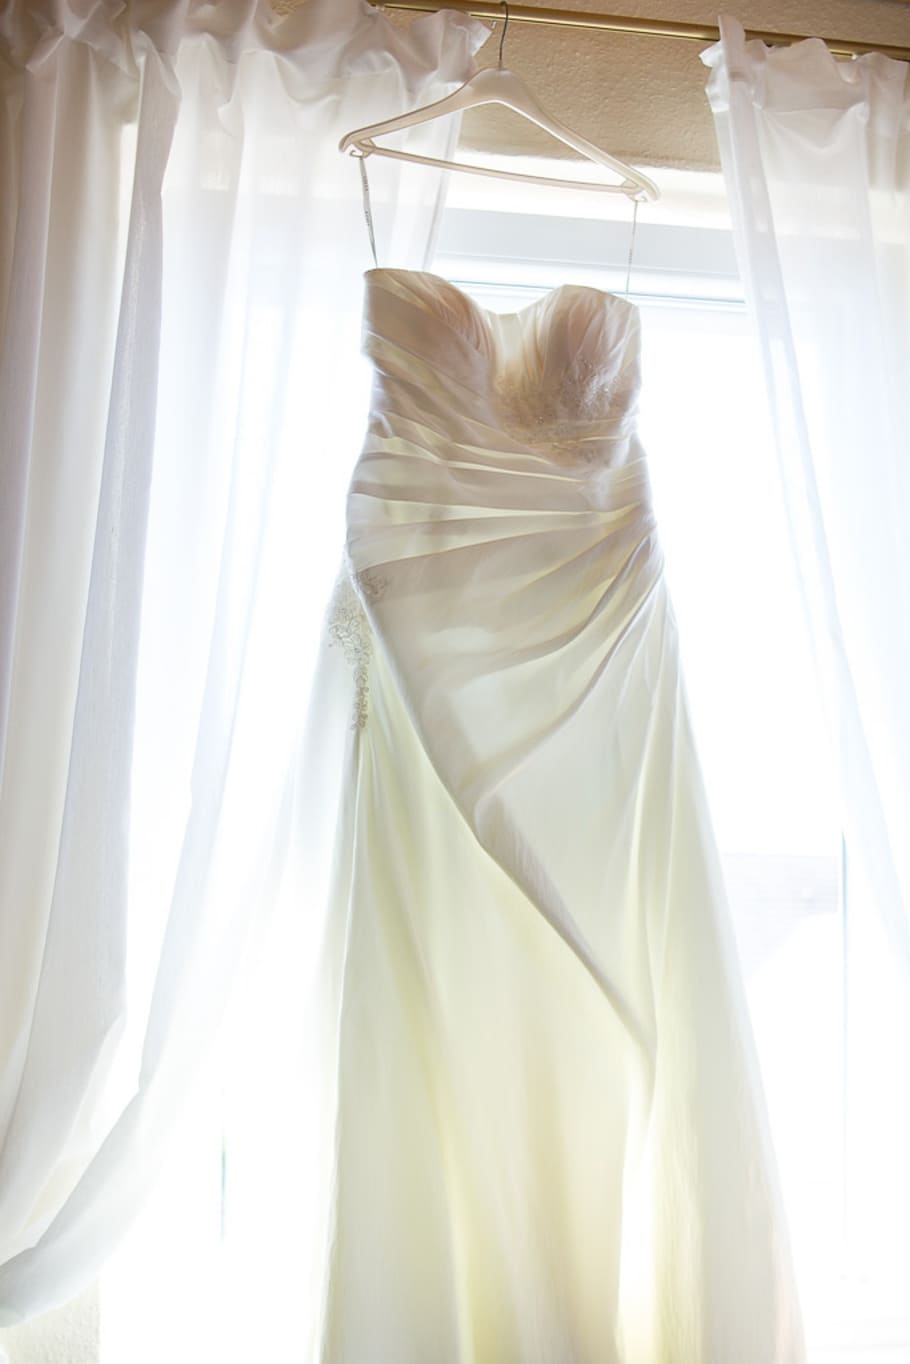 white drape tube wedding gown hang on clothes hanger against window curtains